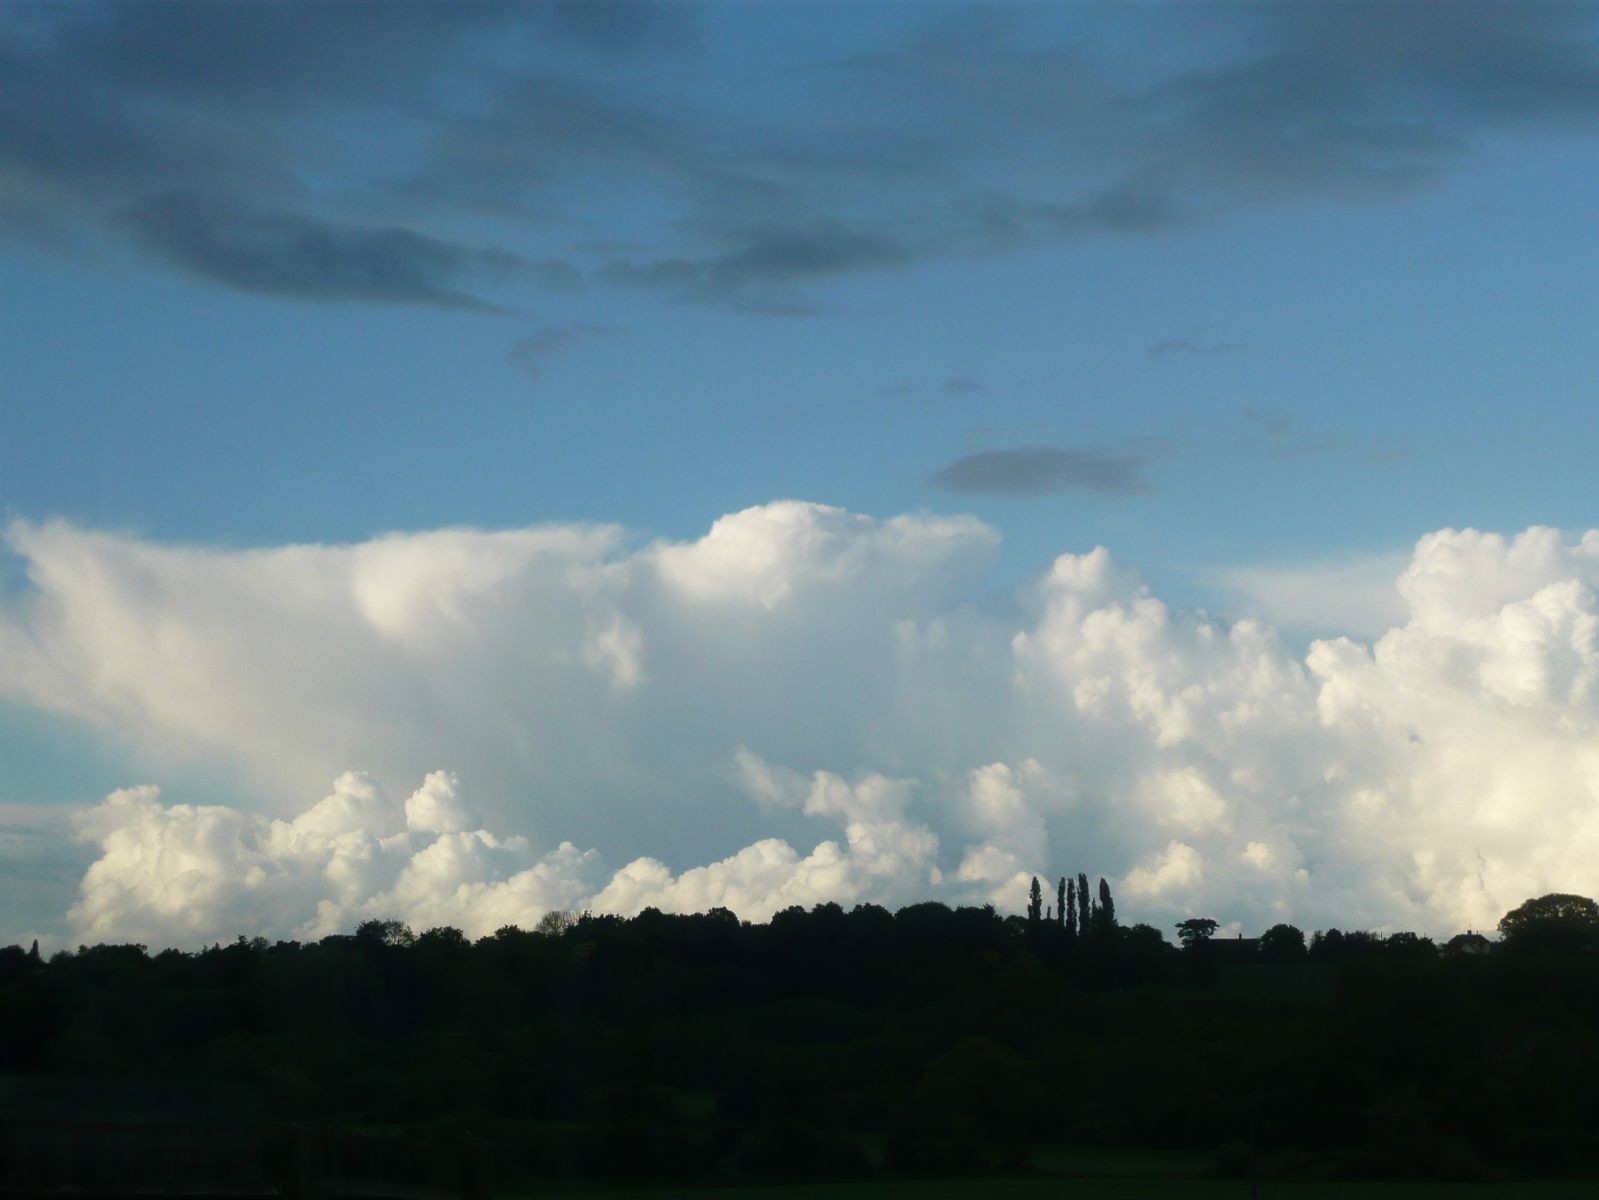 Anvil forming, late afternoon in East Essex - 24th May 2014